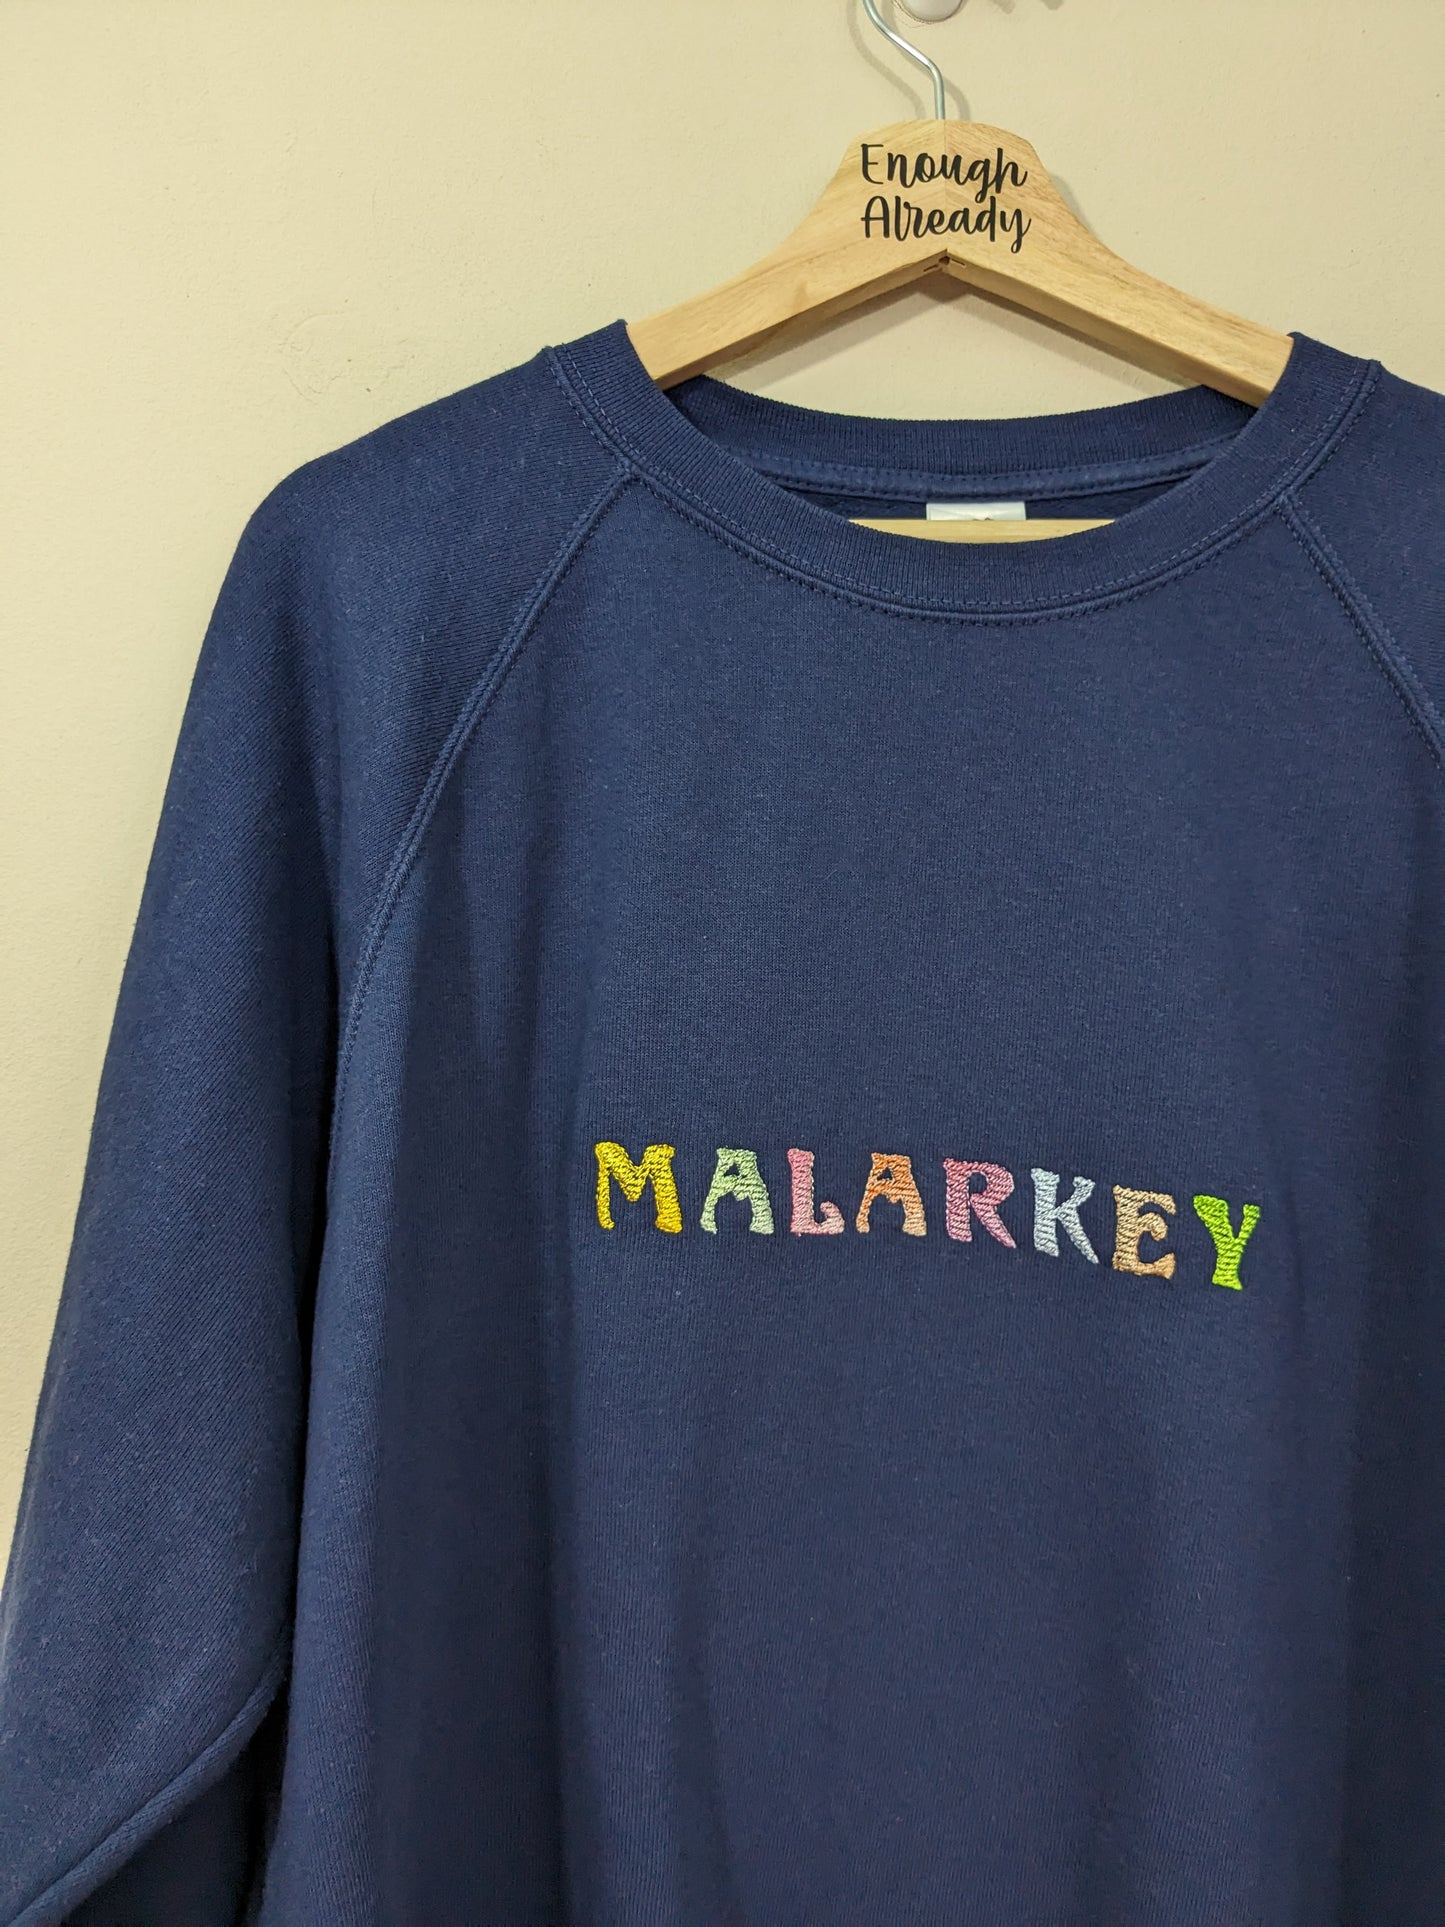 Size Large Reworked Navy Sweatshirt with Embroidered Malarkey Design - Ridiculous English Words Collection